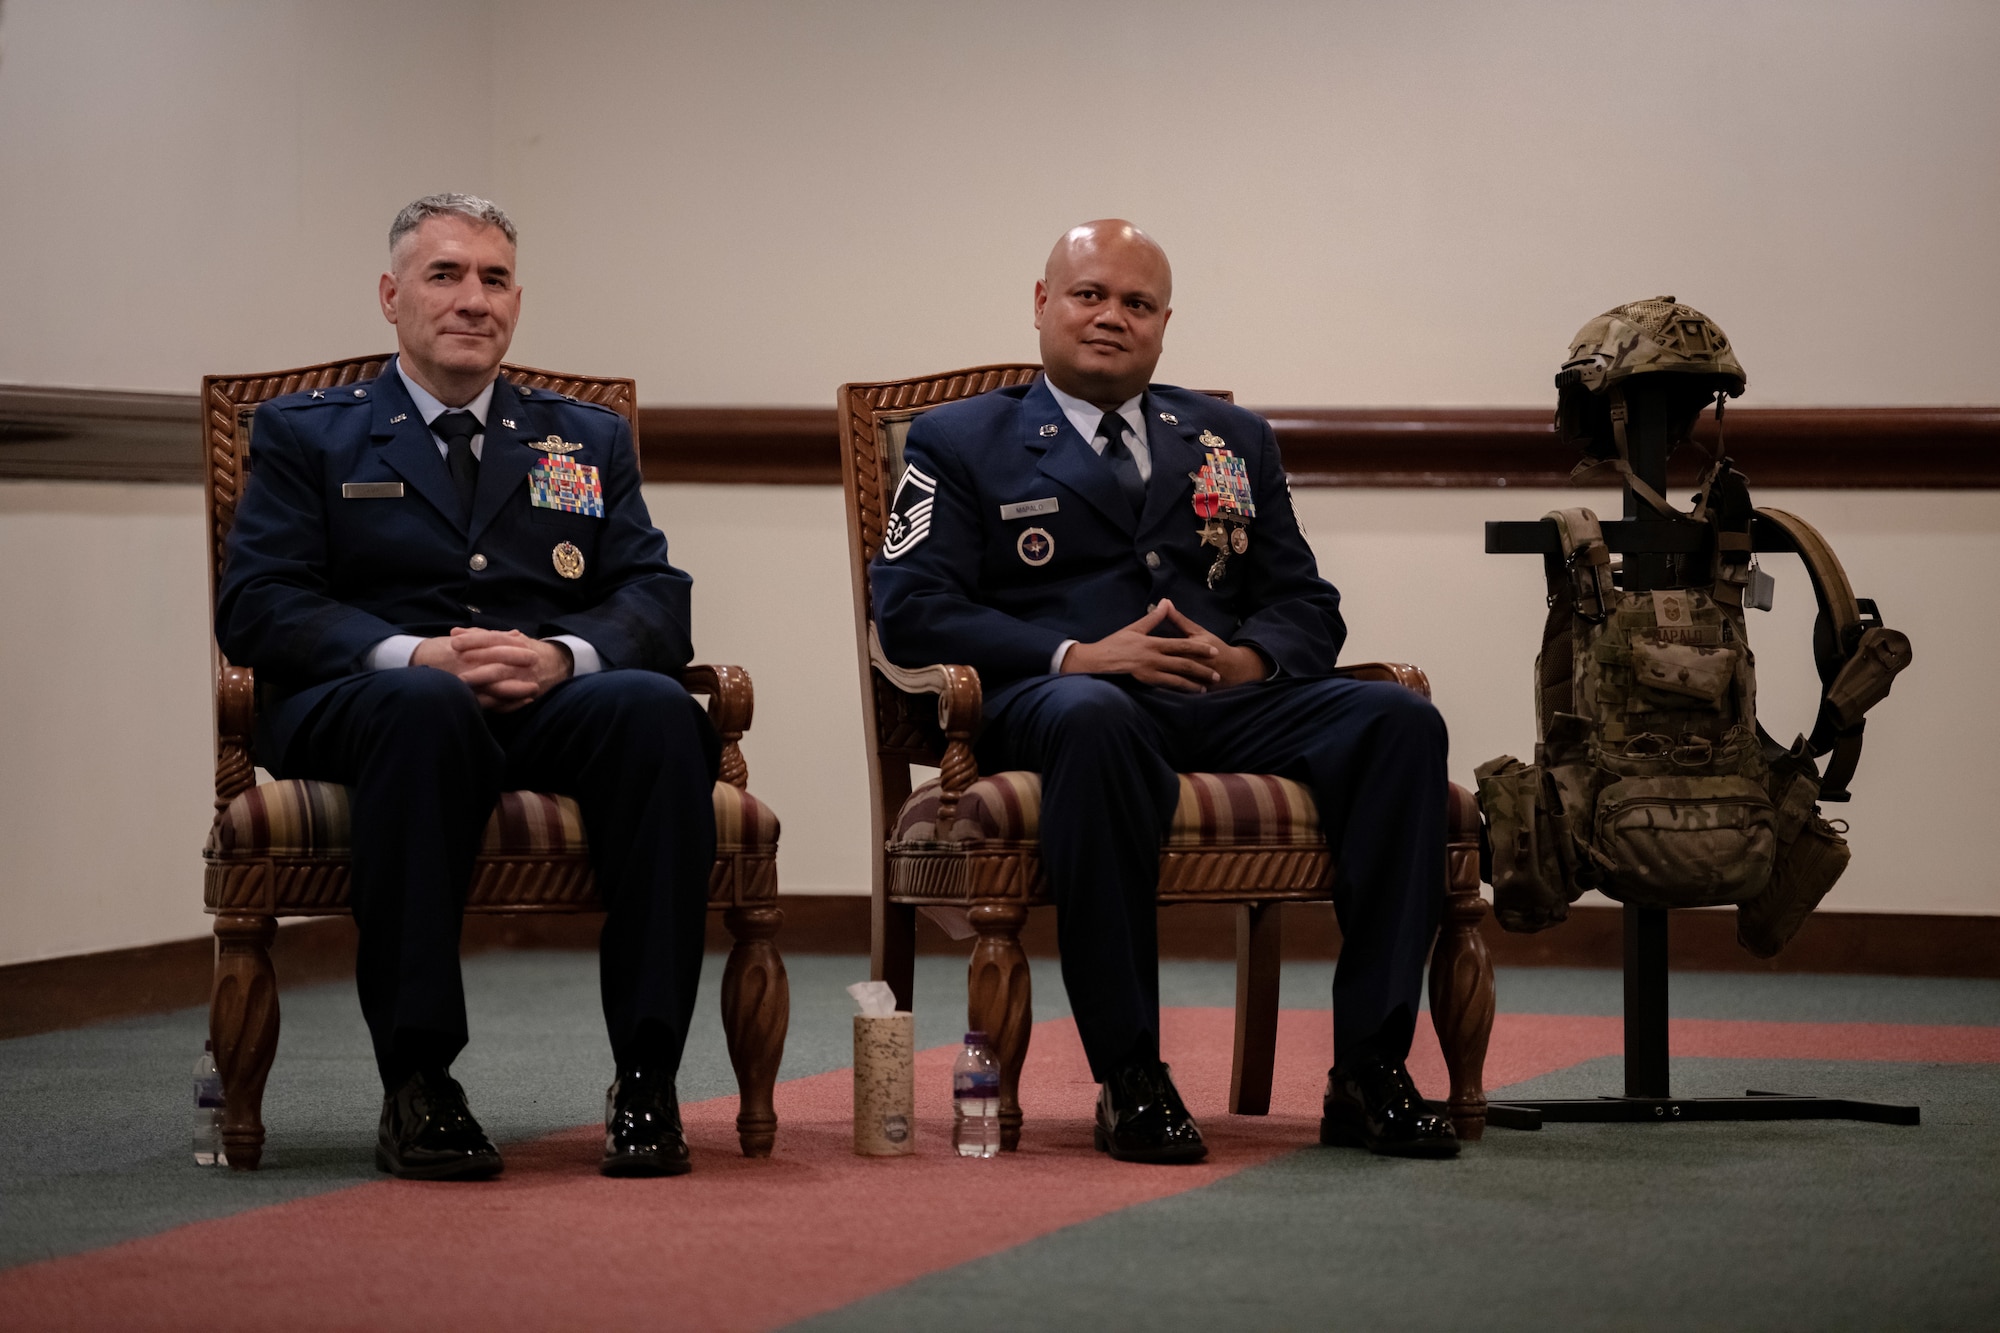 U.S. Air Force Brig. Gen. Joseph Campo and Senior Master Sgt. Jeremy Mapalo sit side by side during a Bronze Star presentation ceremony.